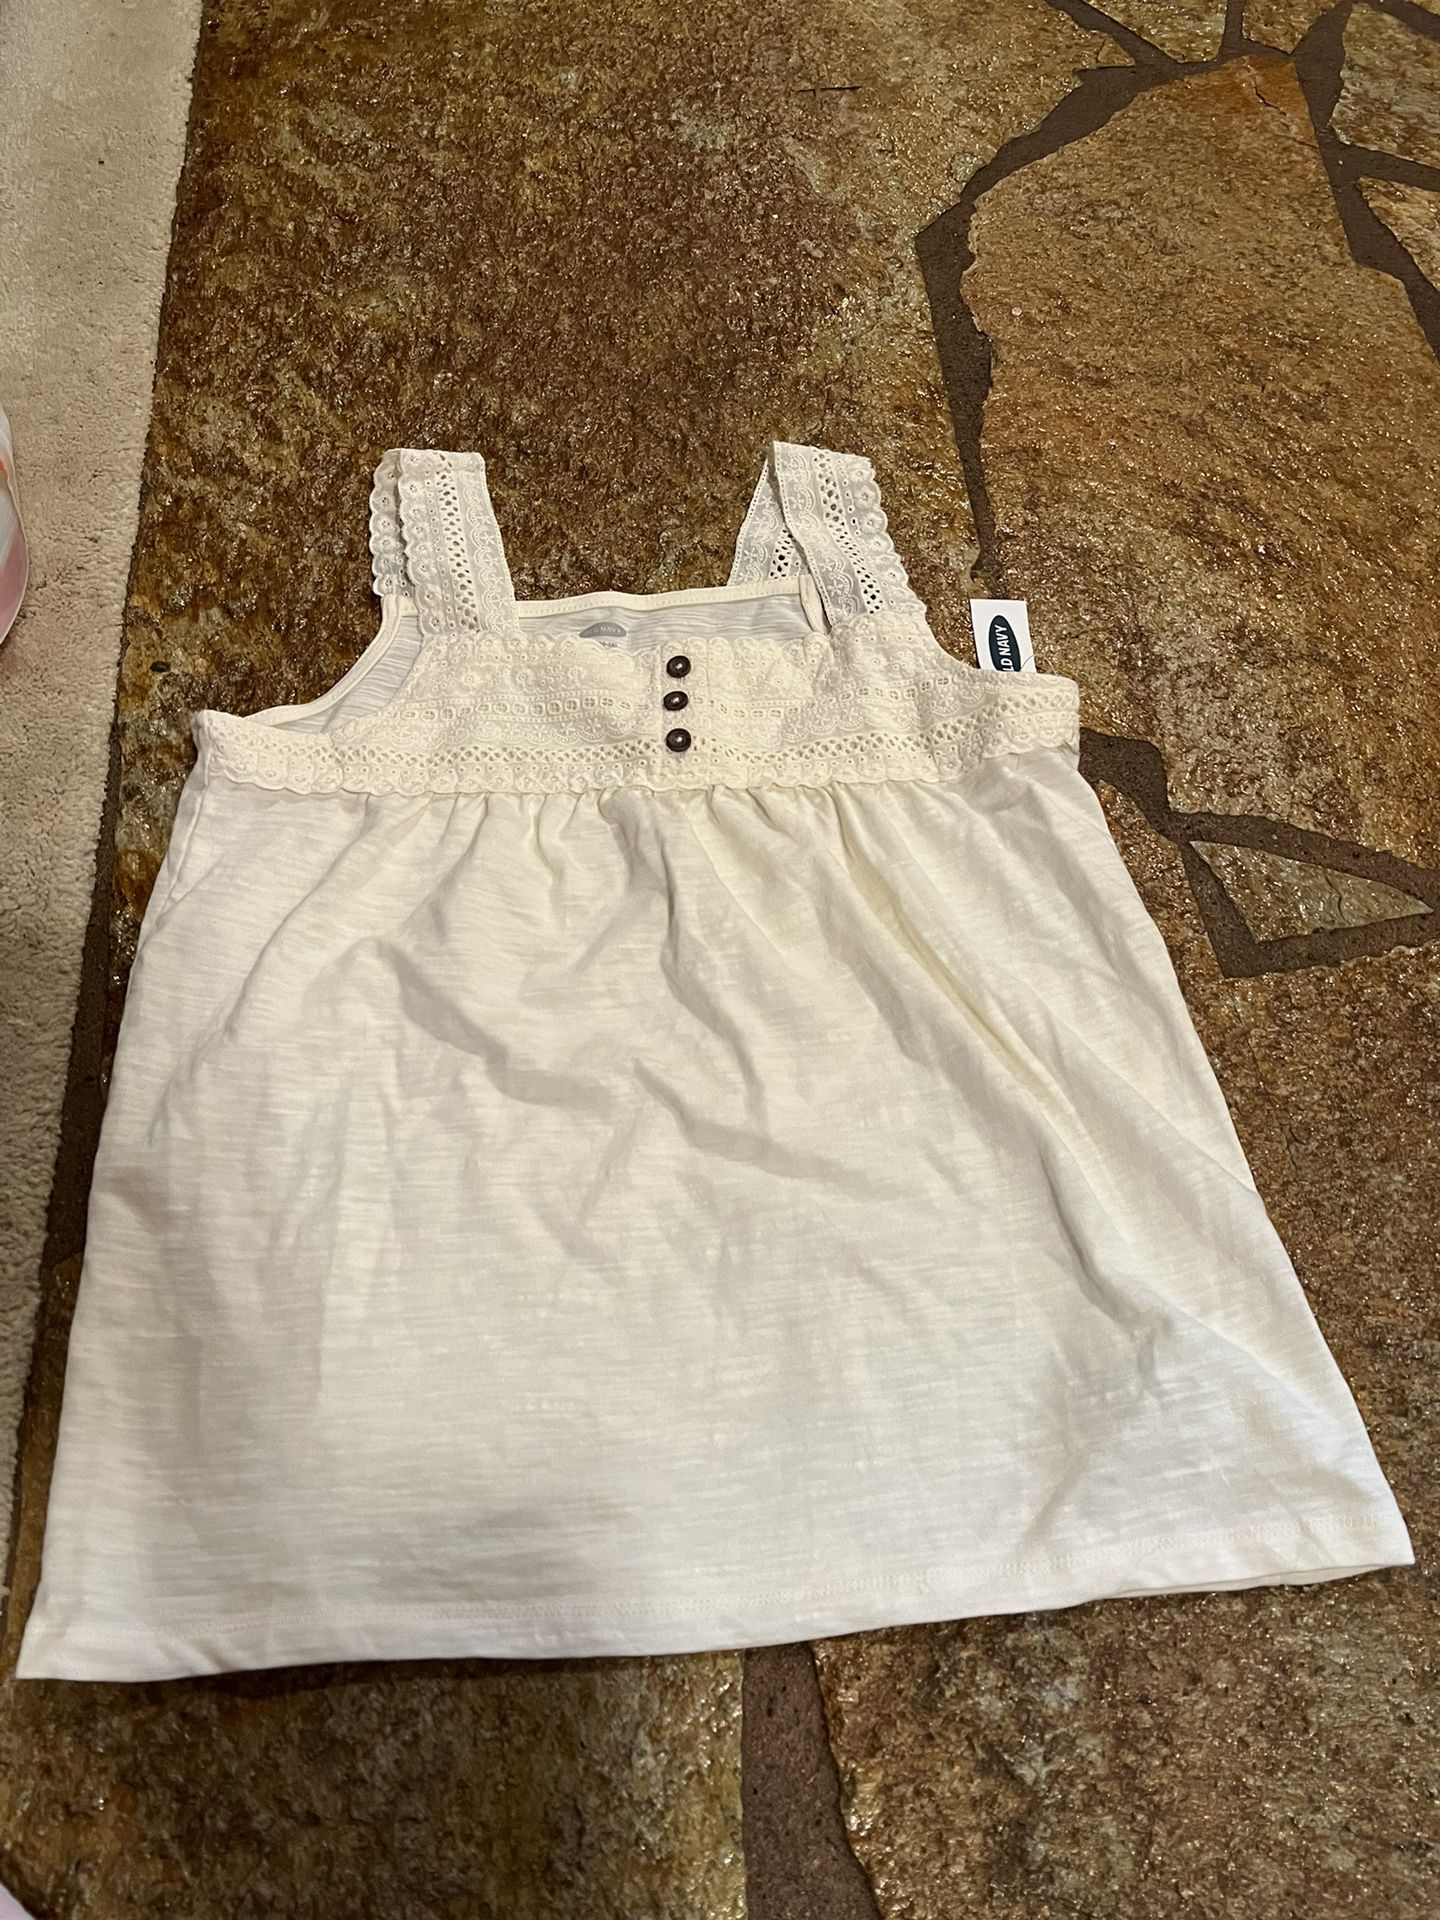 Girls Size XL (14/16) New With Tags Tank Top